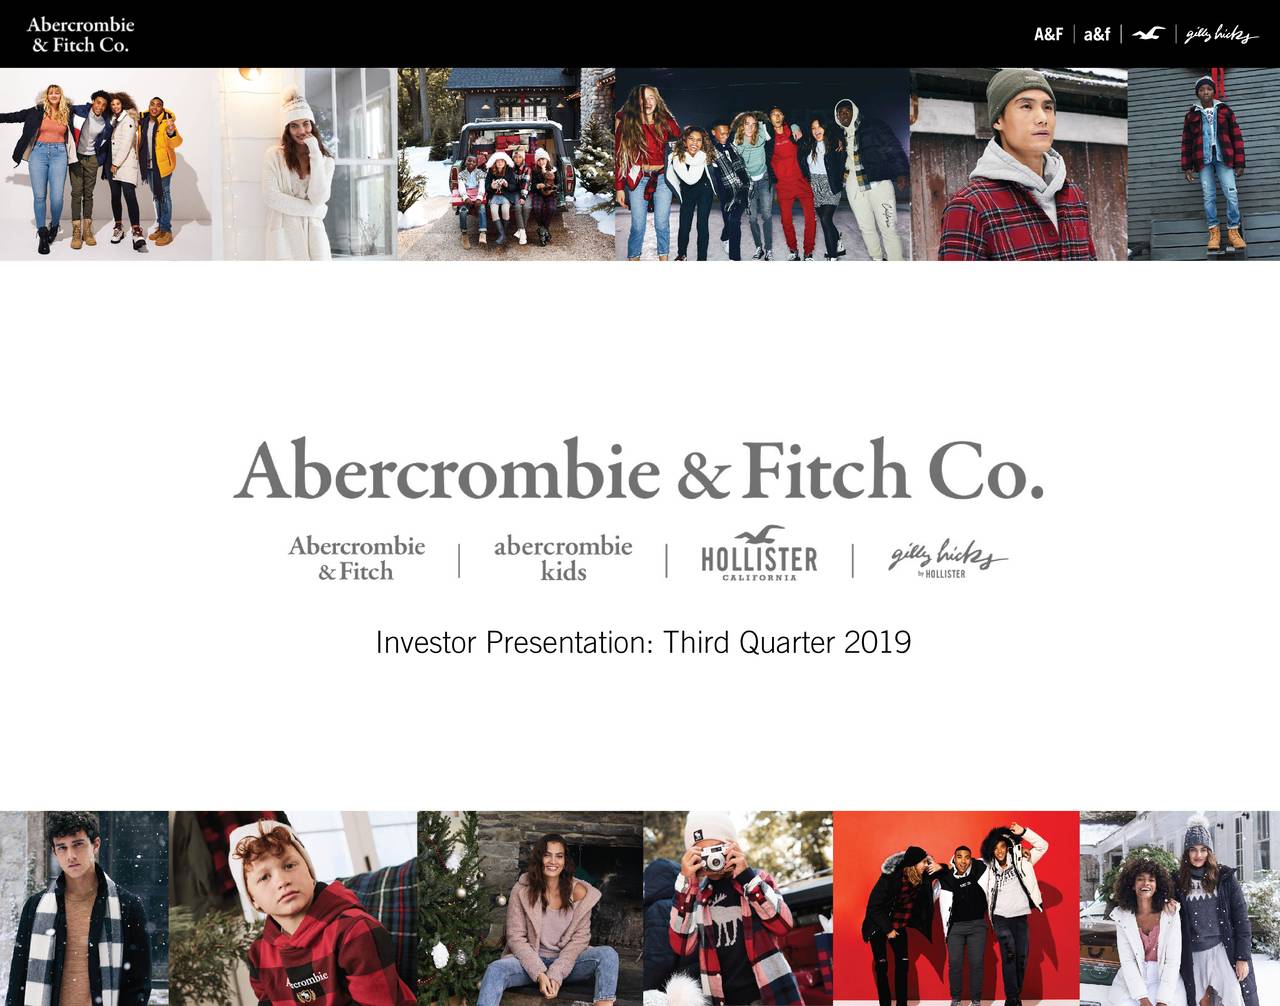 abercrombie & fitch 2019